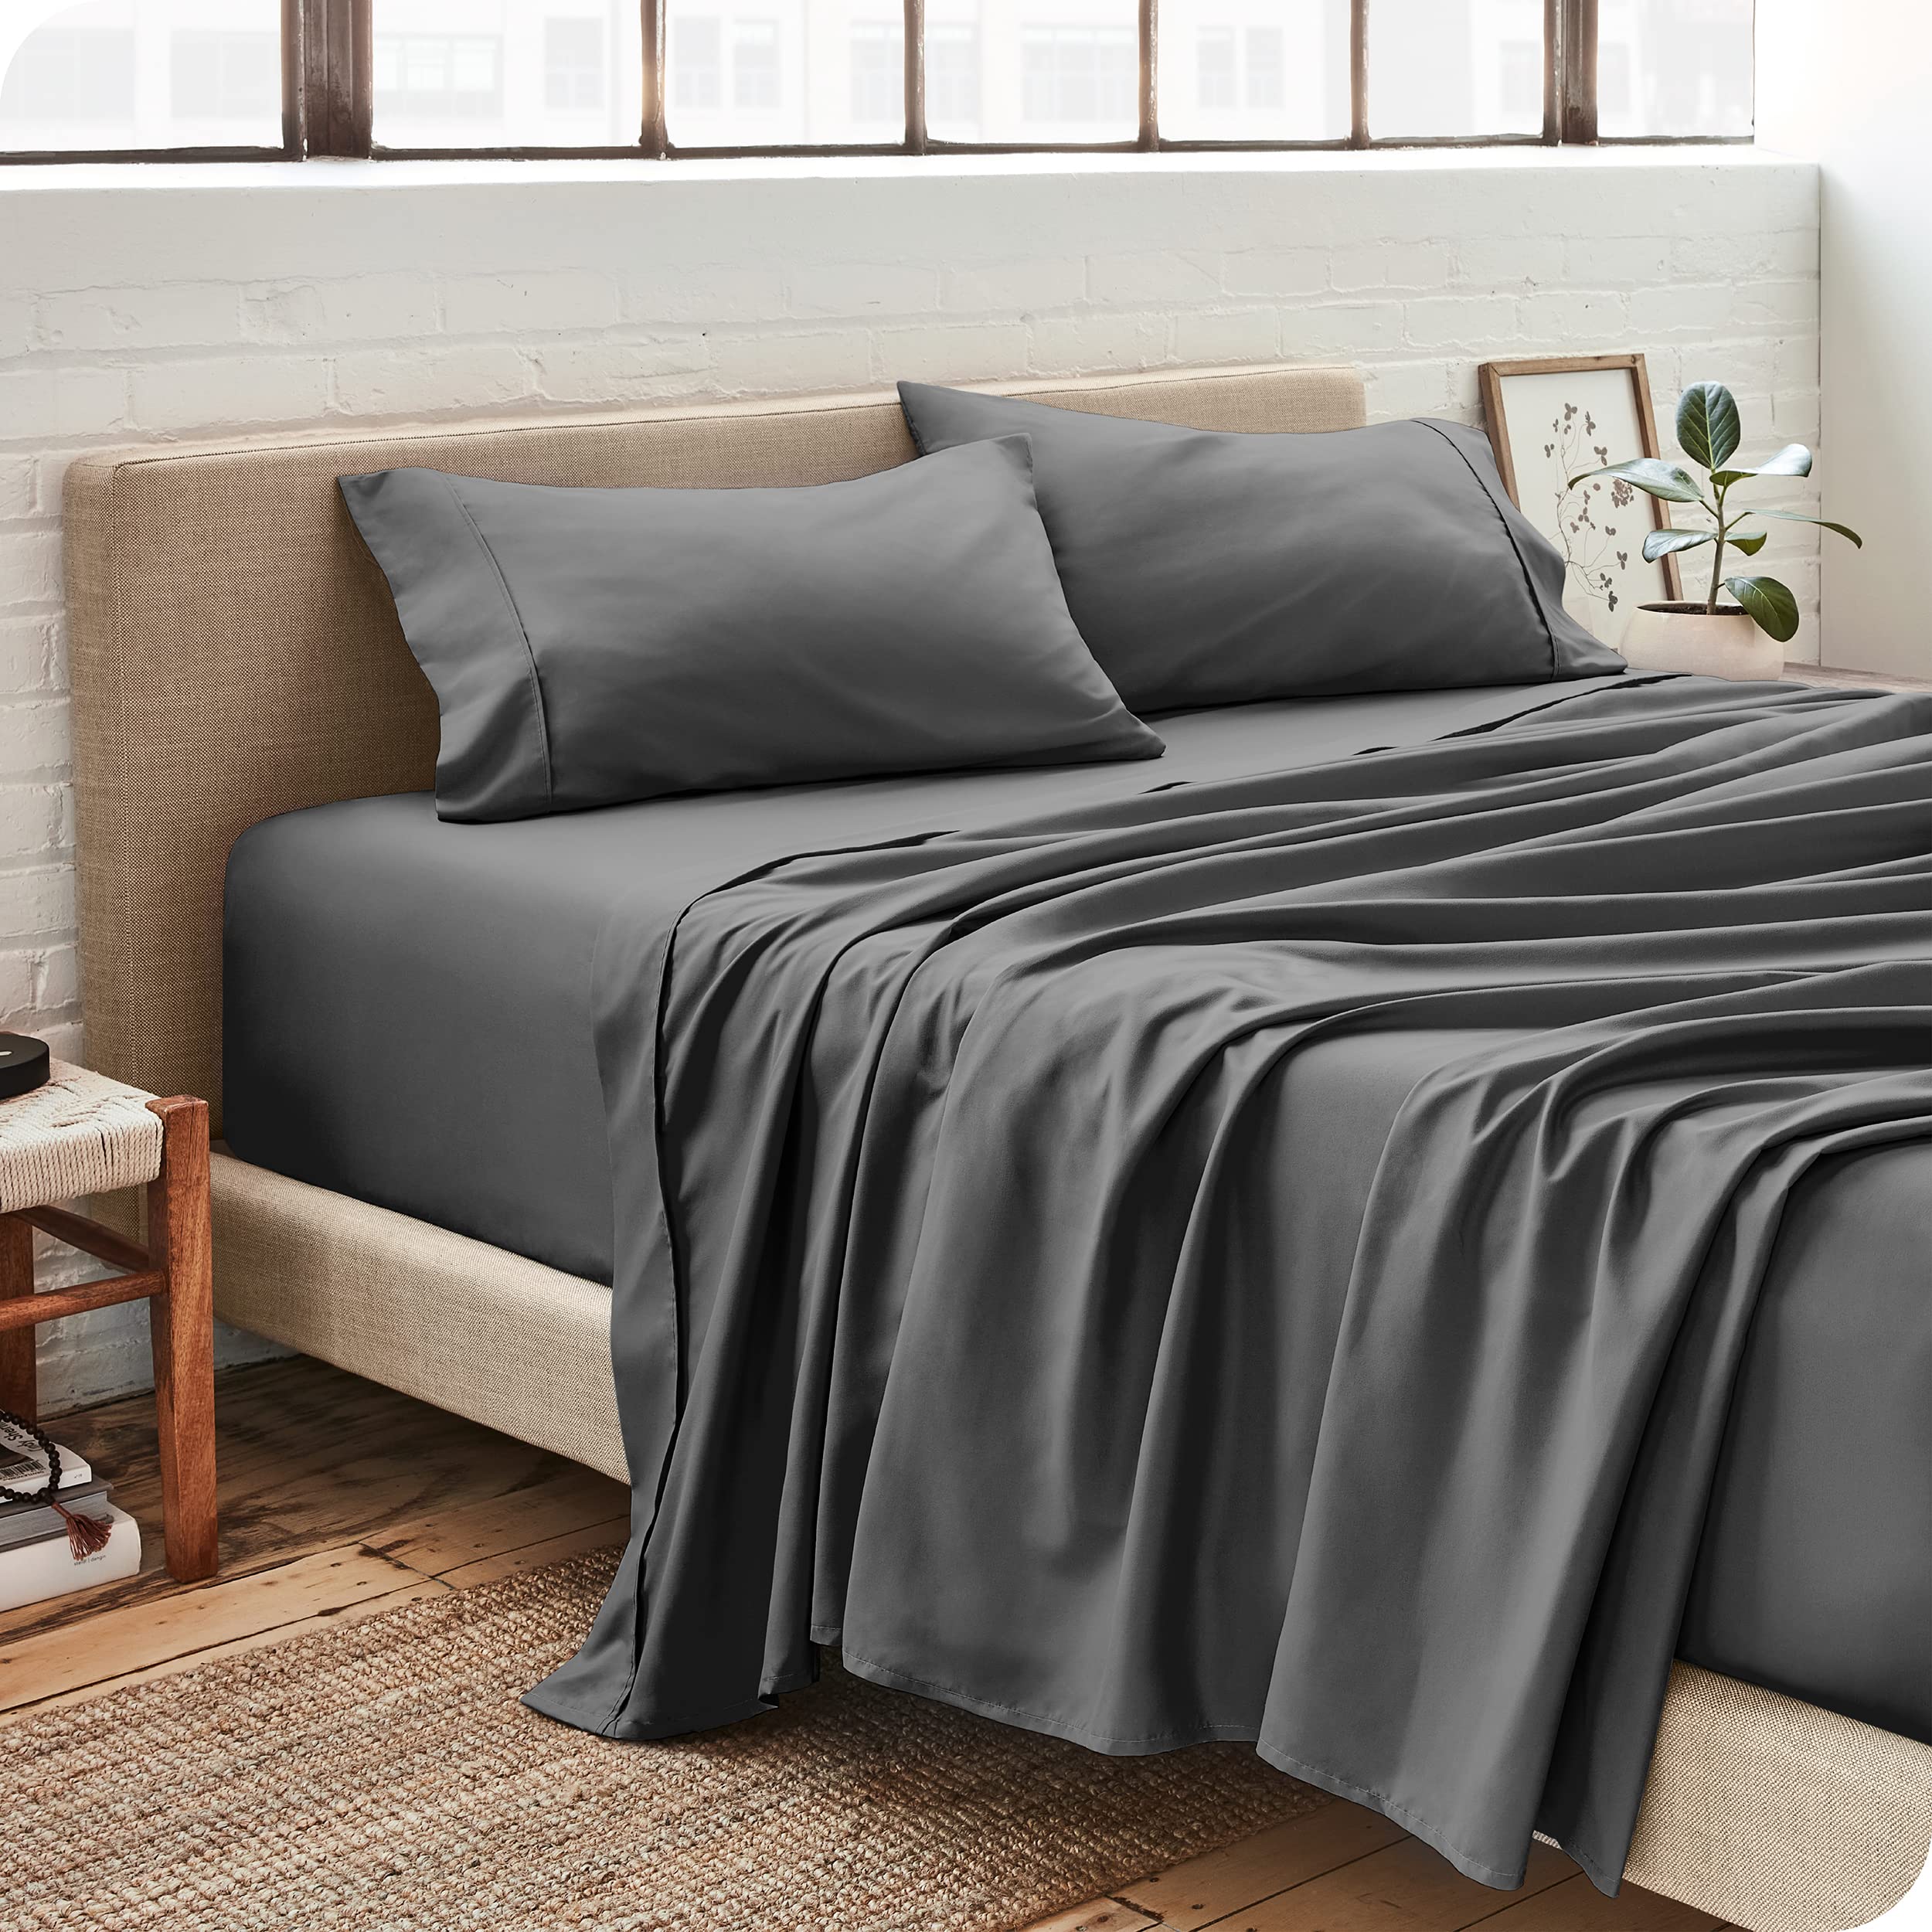 Bare Home King Sheet Set - 1800 Ultra-Soft Microfibre King Bed Sheets - Hydro-Brushed - Deep Pocket - Fitted Sheet, Flat Sheet, and 2 Pillowcases - Bedding Sheets (King, Grey)